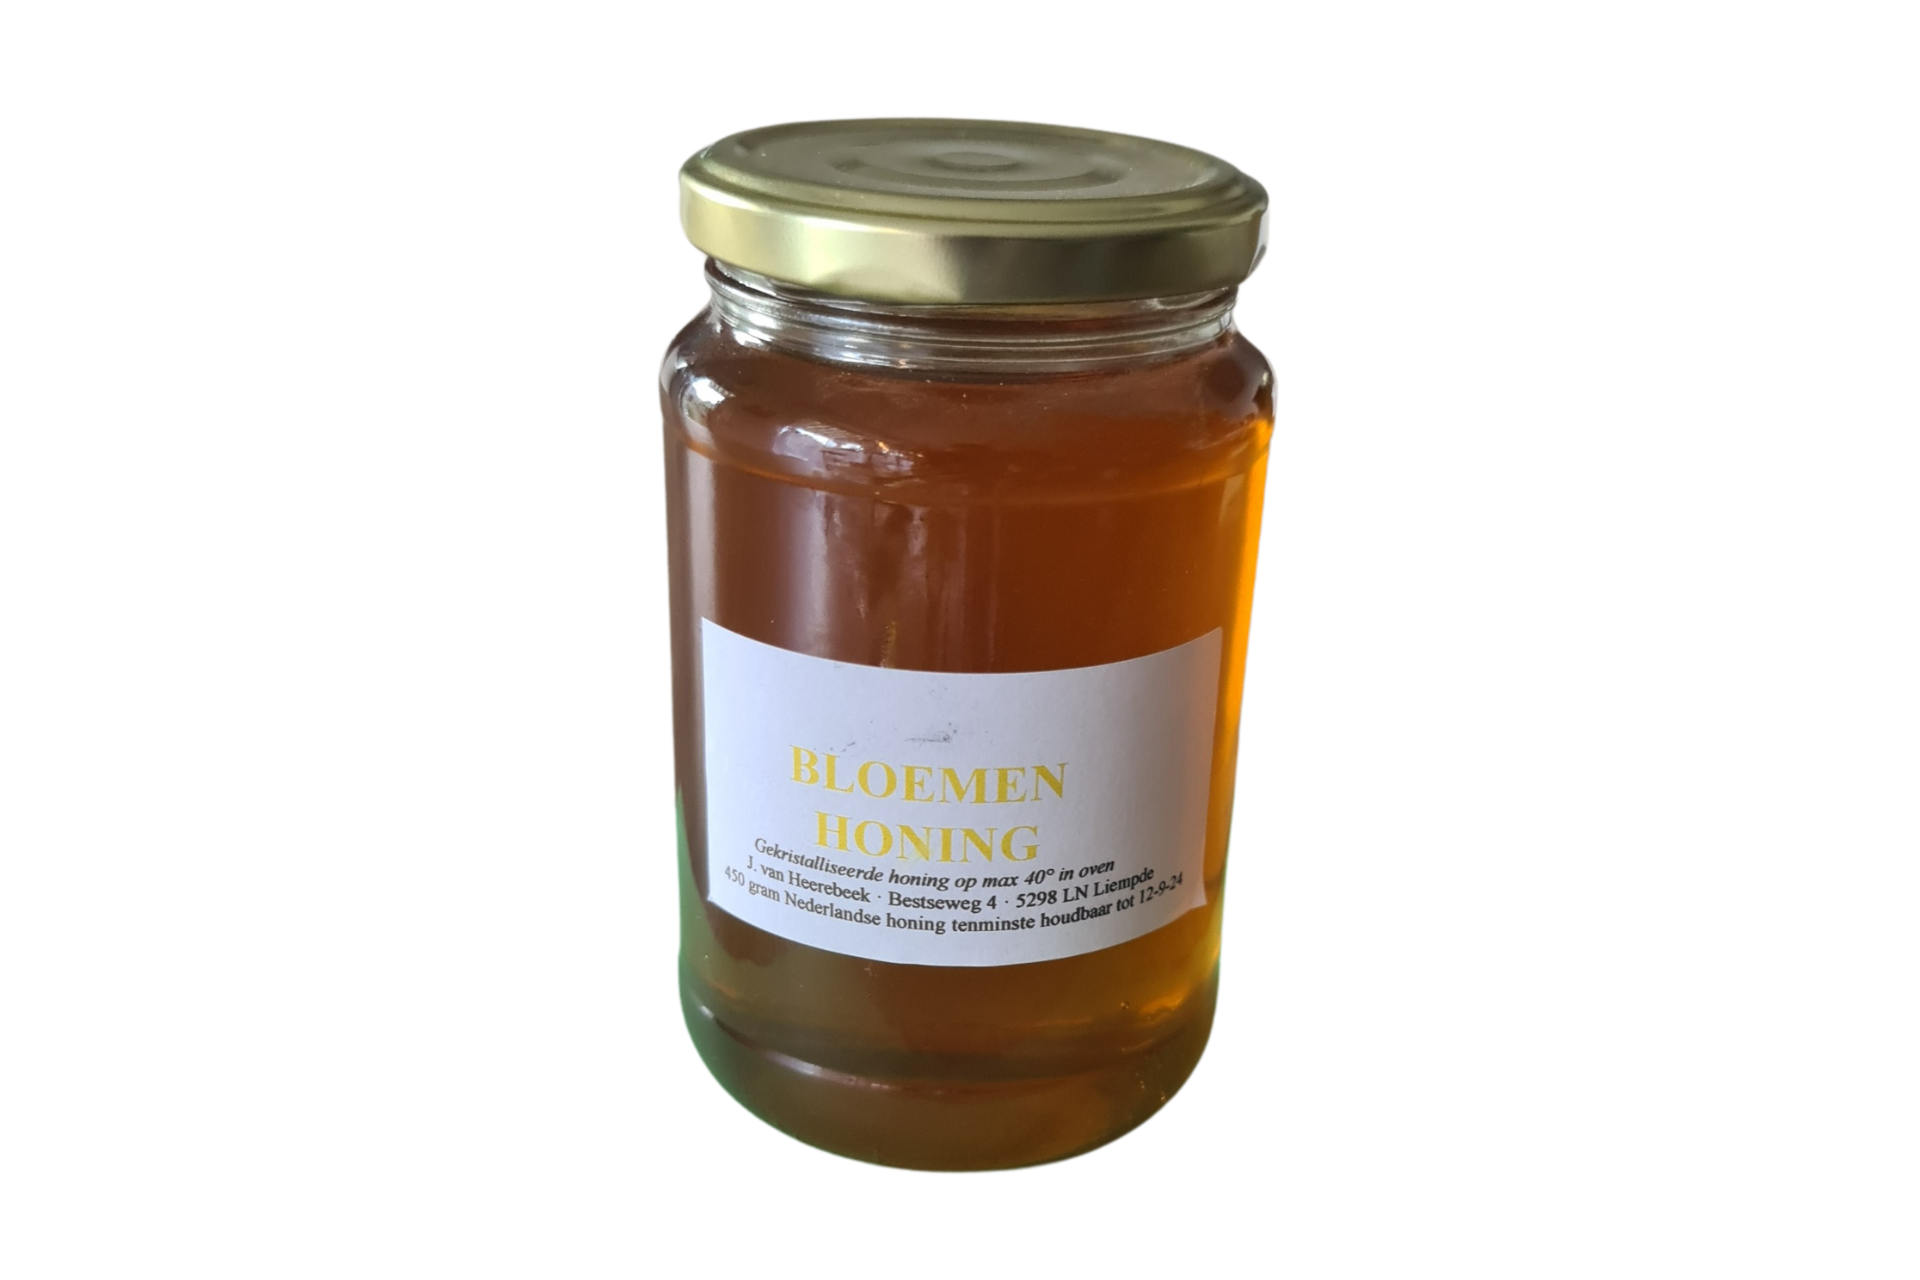 Flower honey handcrafted honey right from the farmers and producers